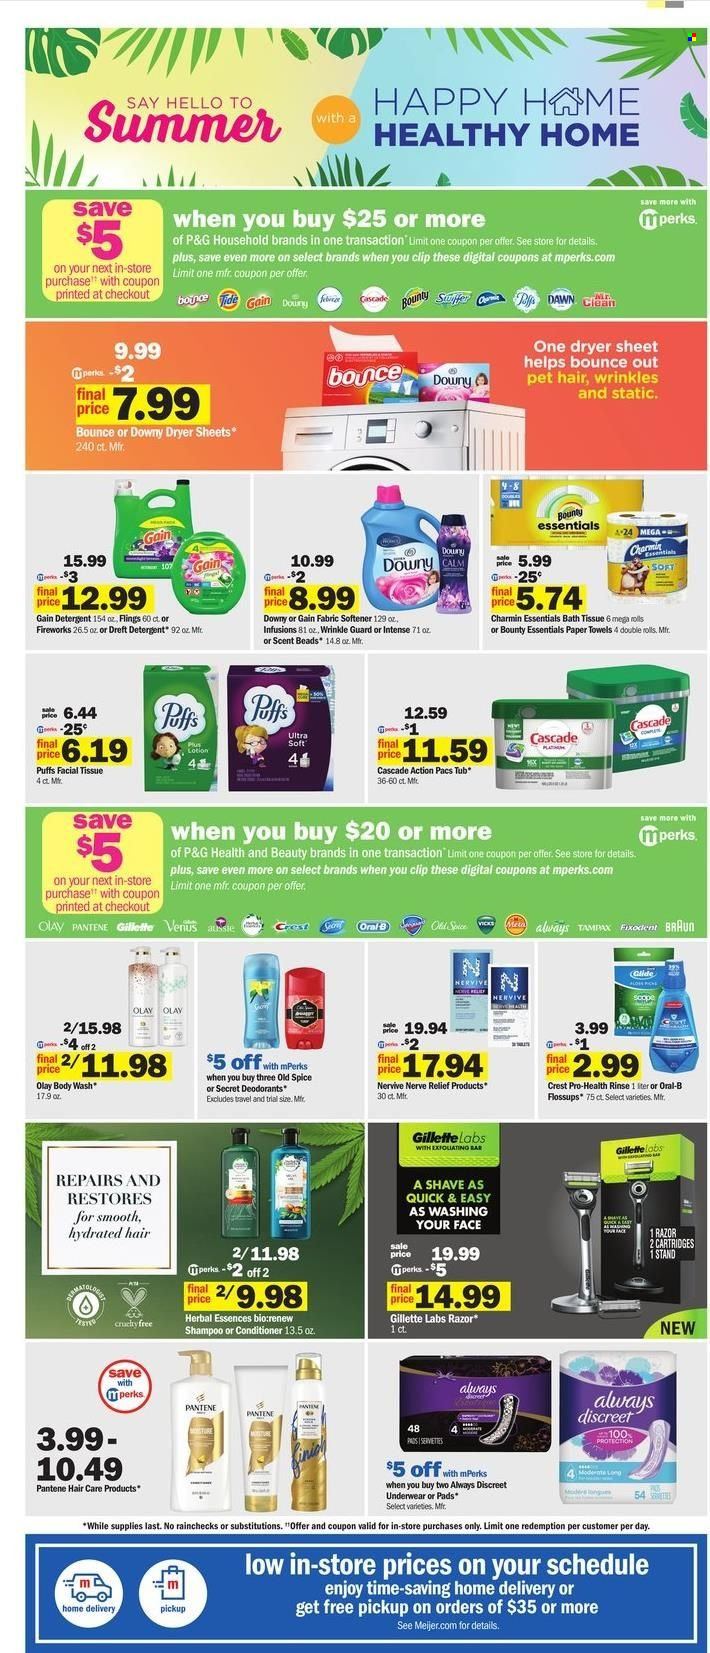 thumbnail - Meijer Flyer - 05/29/2022 - 06/04/2022 - Sales products - puffs, Bounty, spice, bath tissue, kitchen towels, paper towels, Charmin, detergent, Gain, Cascade, Tide, fabric softener, dryer sheets, Downy Laundry, body wash, shampoo, Old Spice, Oral-B, Fixodent, Crest, Tampax, sanitary pads, Always Discreet, Olay, Aussie, conditioner, Pantene, Herbal Essences, deodorant, Gillette, razor, Venus. Page 13.